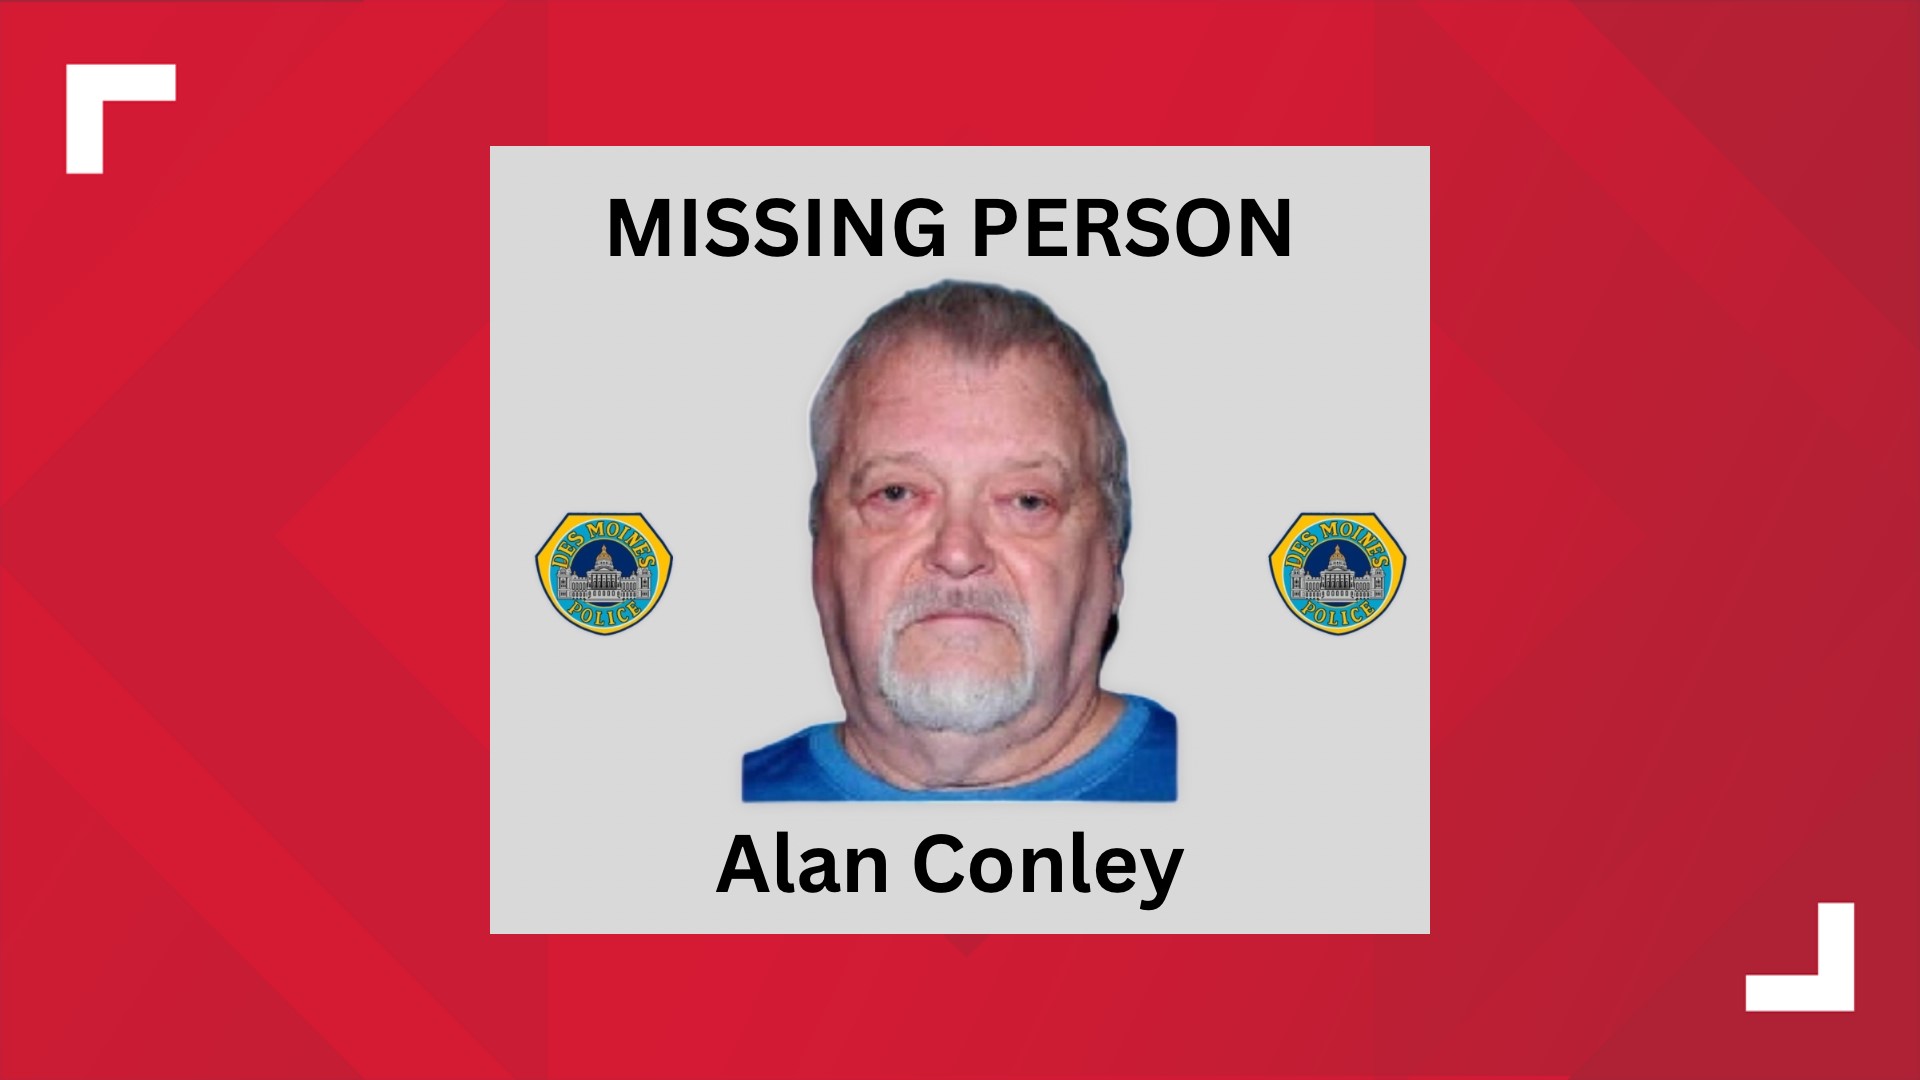 Des Moines police say Alan Conley was last seen around 2:00 a.m. at his north Des Moines home.